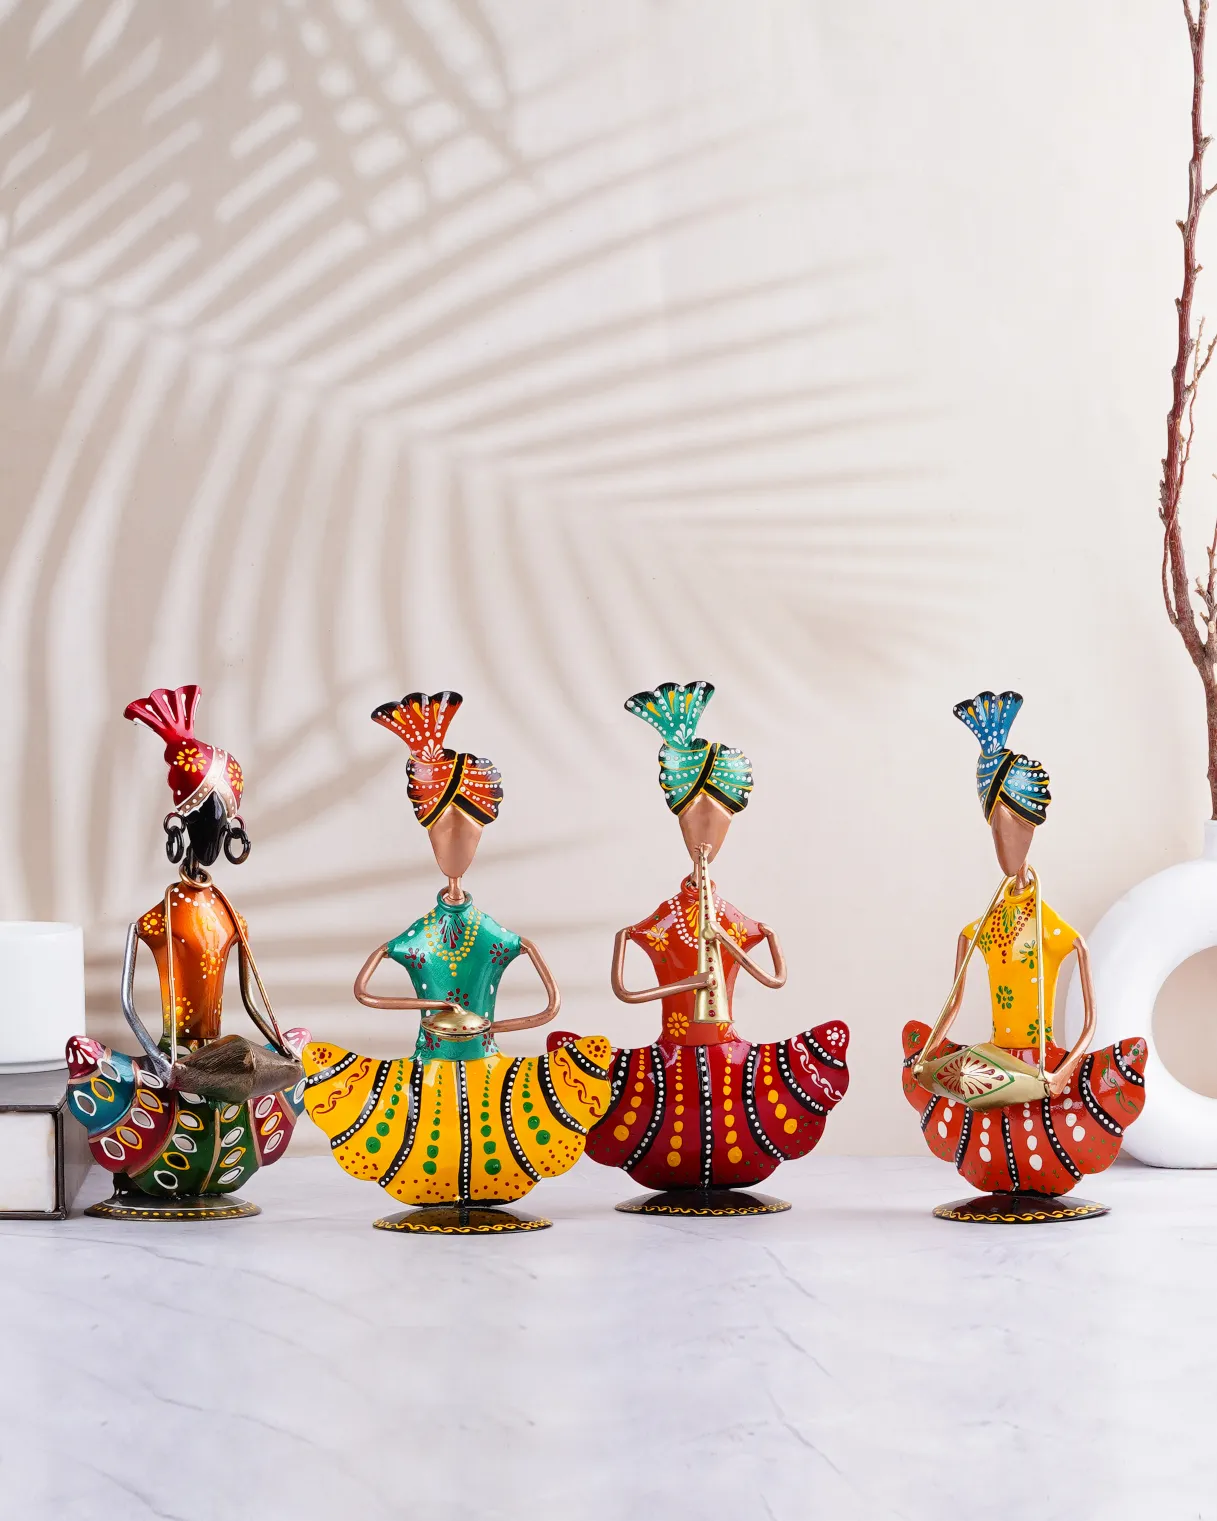 Colorful Rajasthan musician sculpture, showcasing the traditional attire and instruments of the region